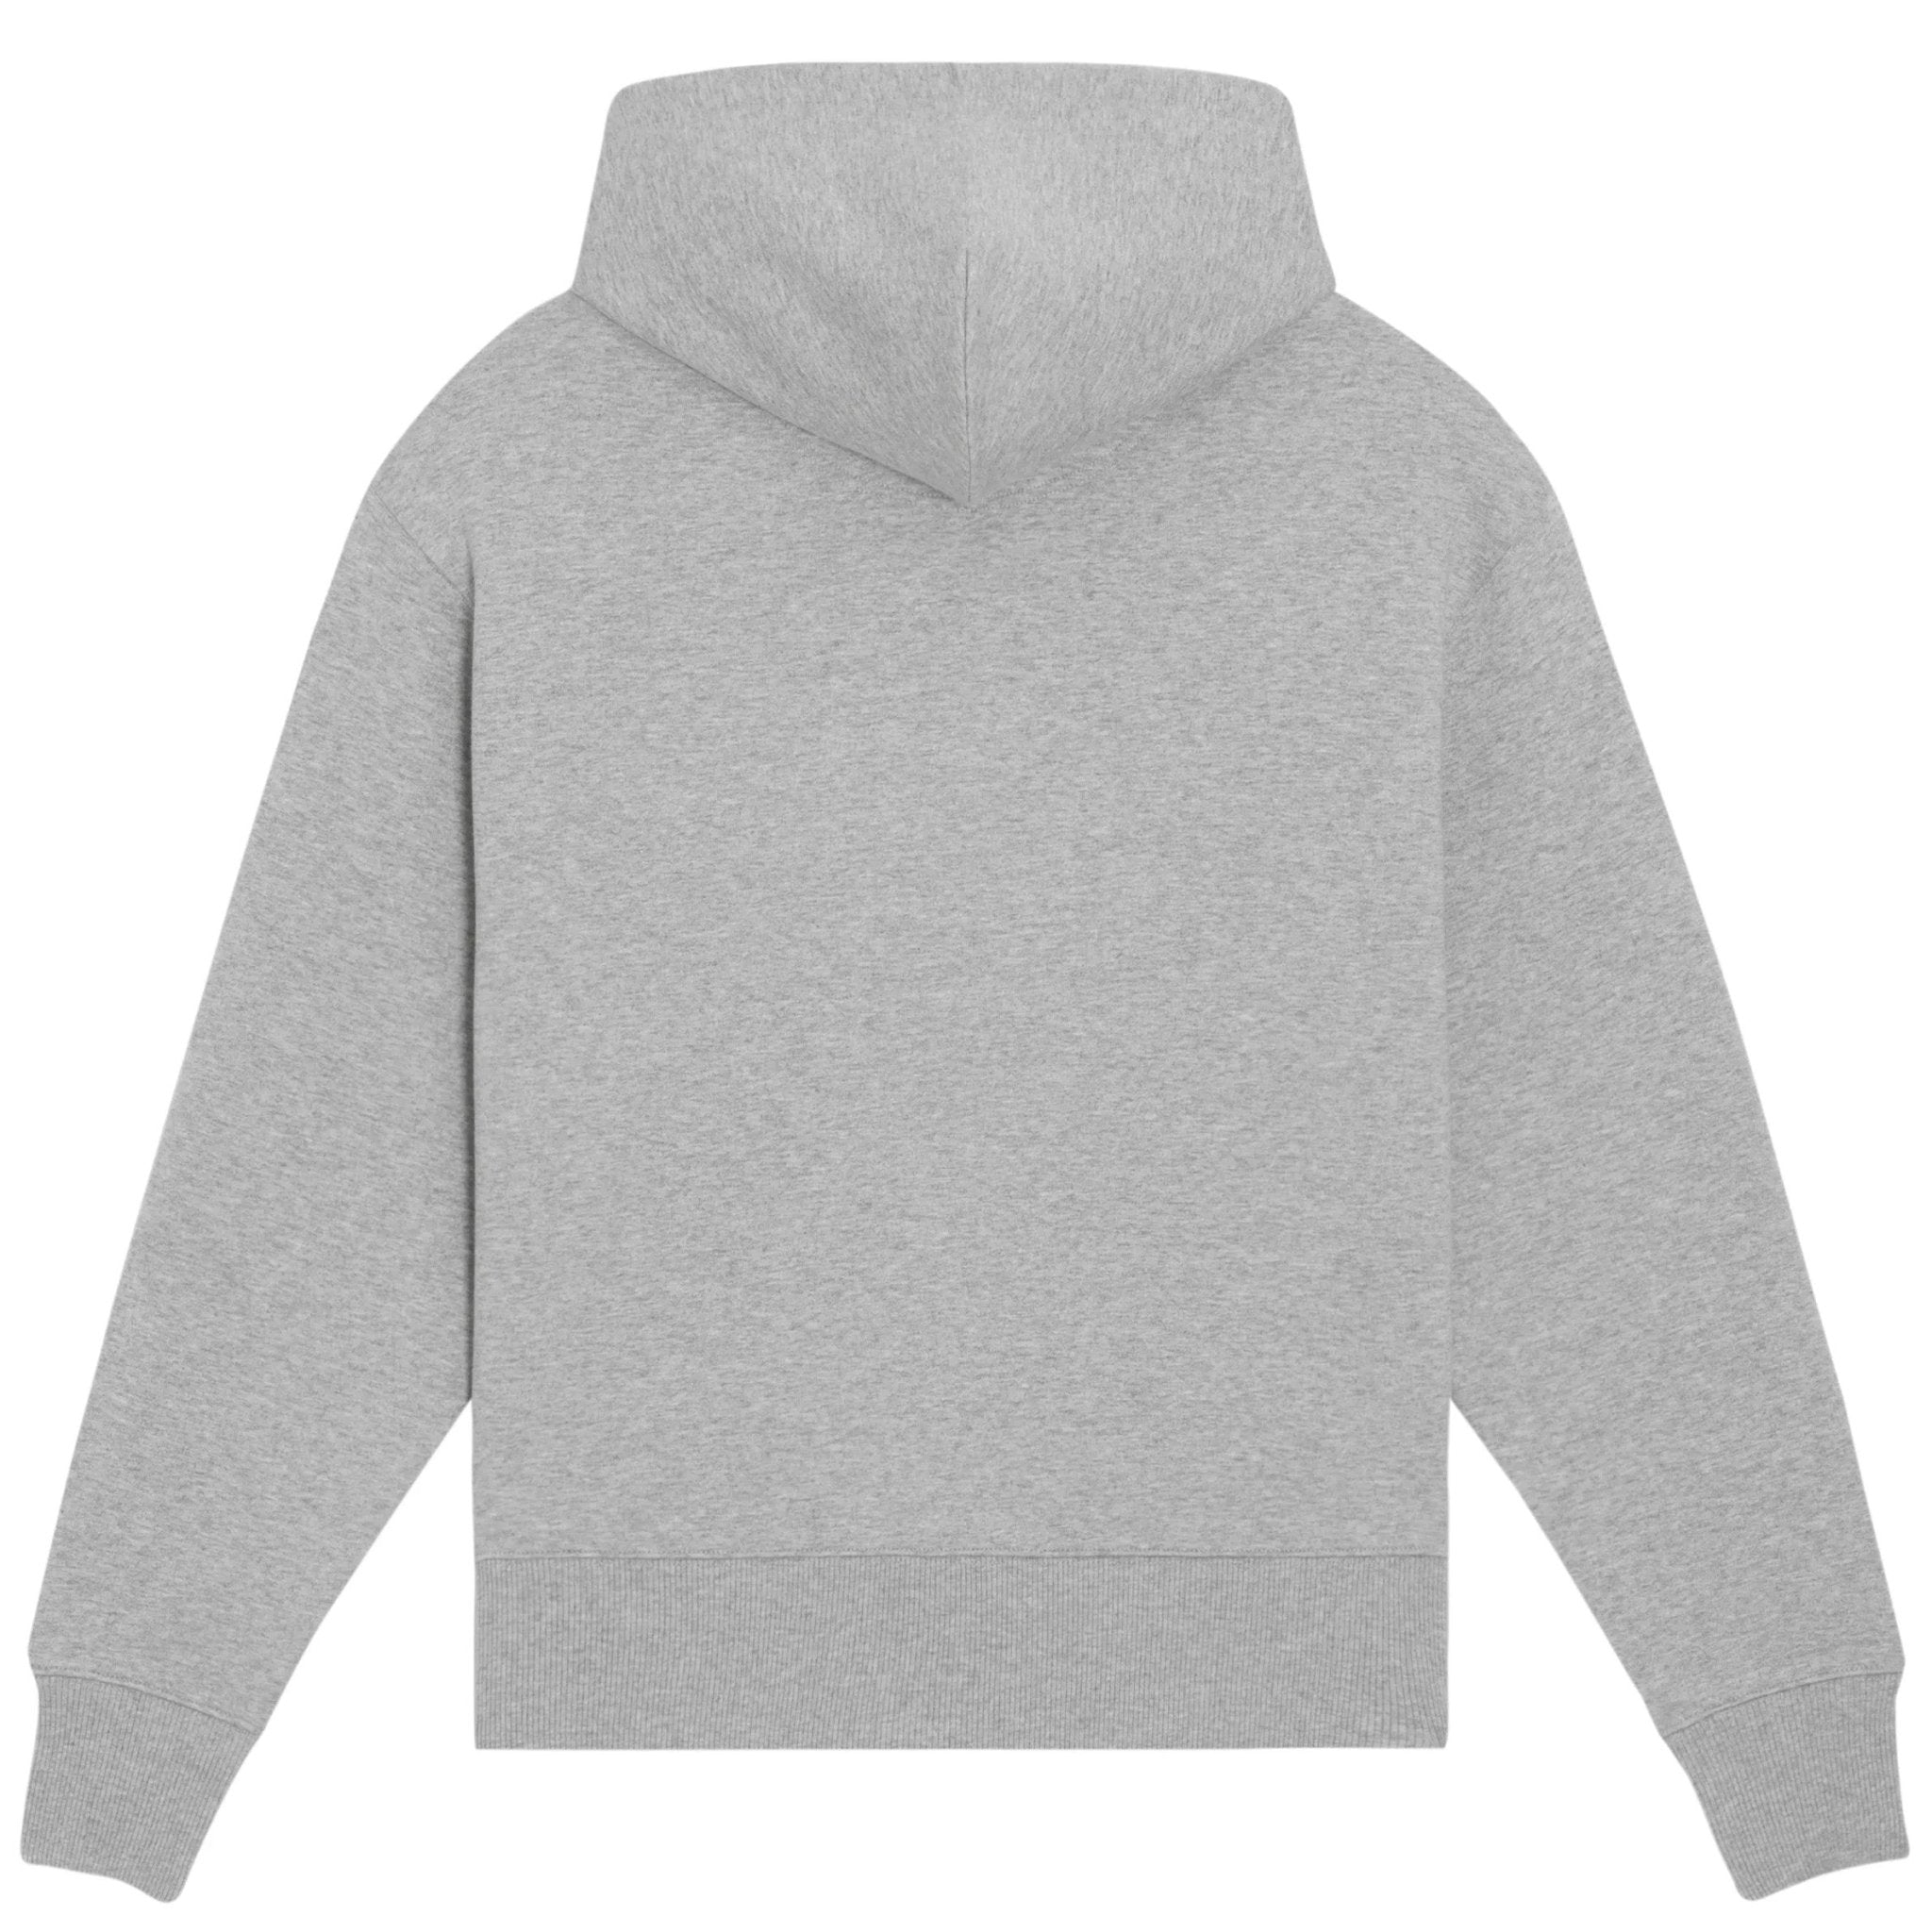 House of Mess: Oversized Hoodie - Moon Soldier